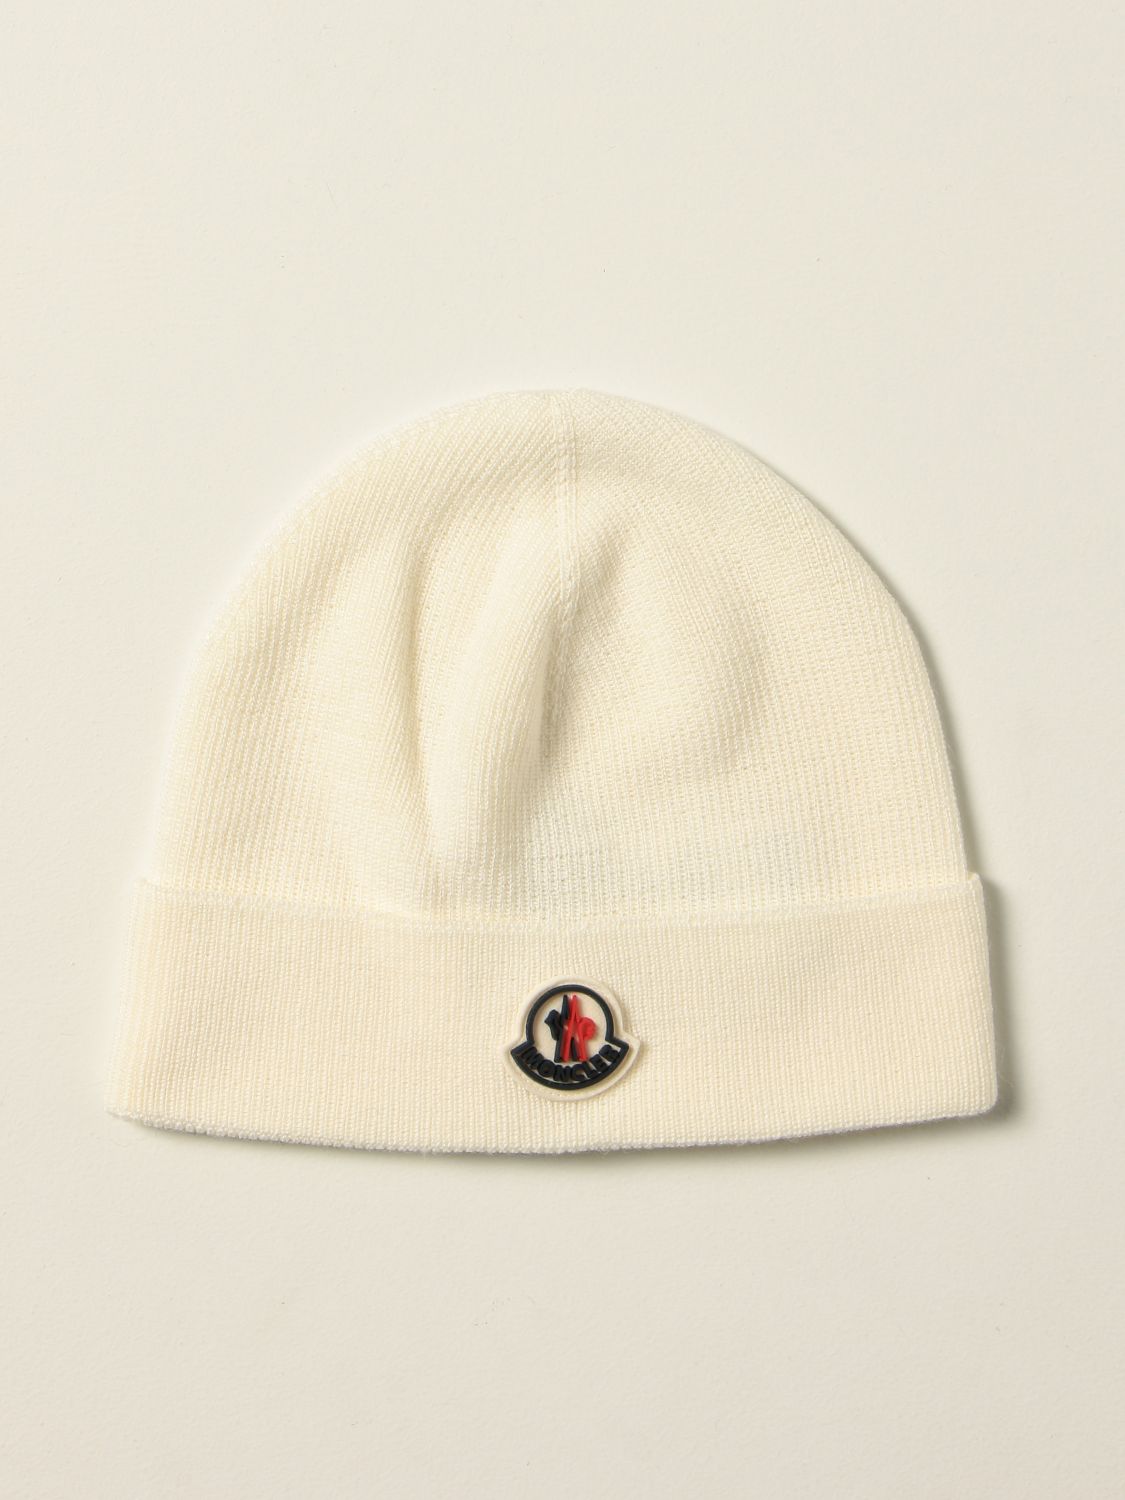 Hat Moncler: Moncler Bobble hat in wool blend yellow cream 1